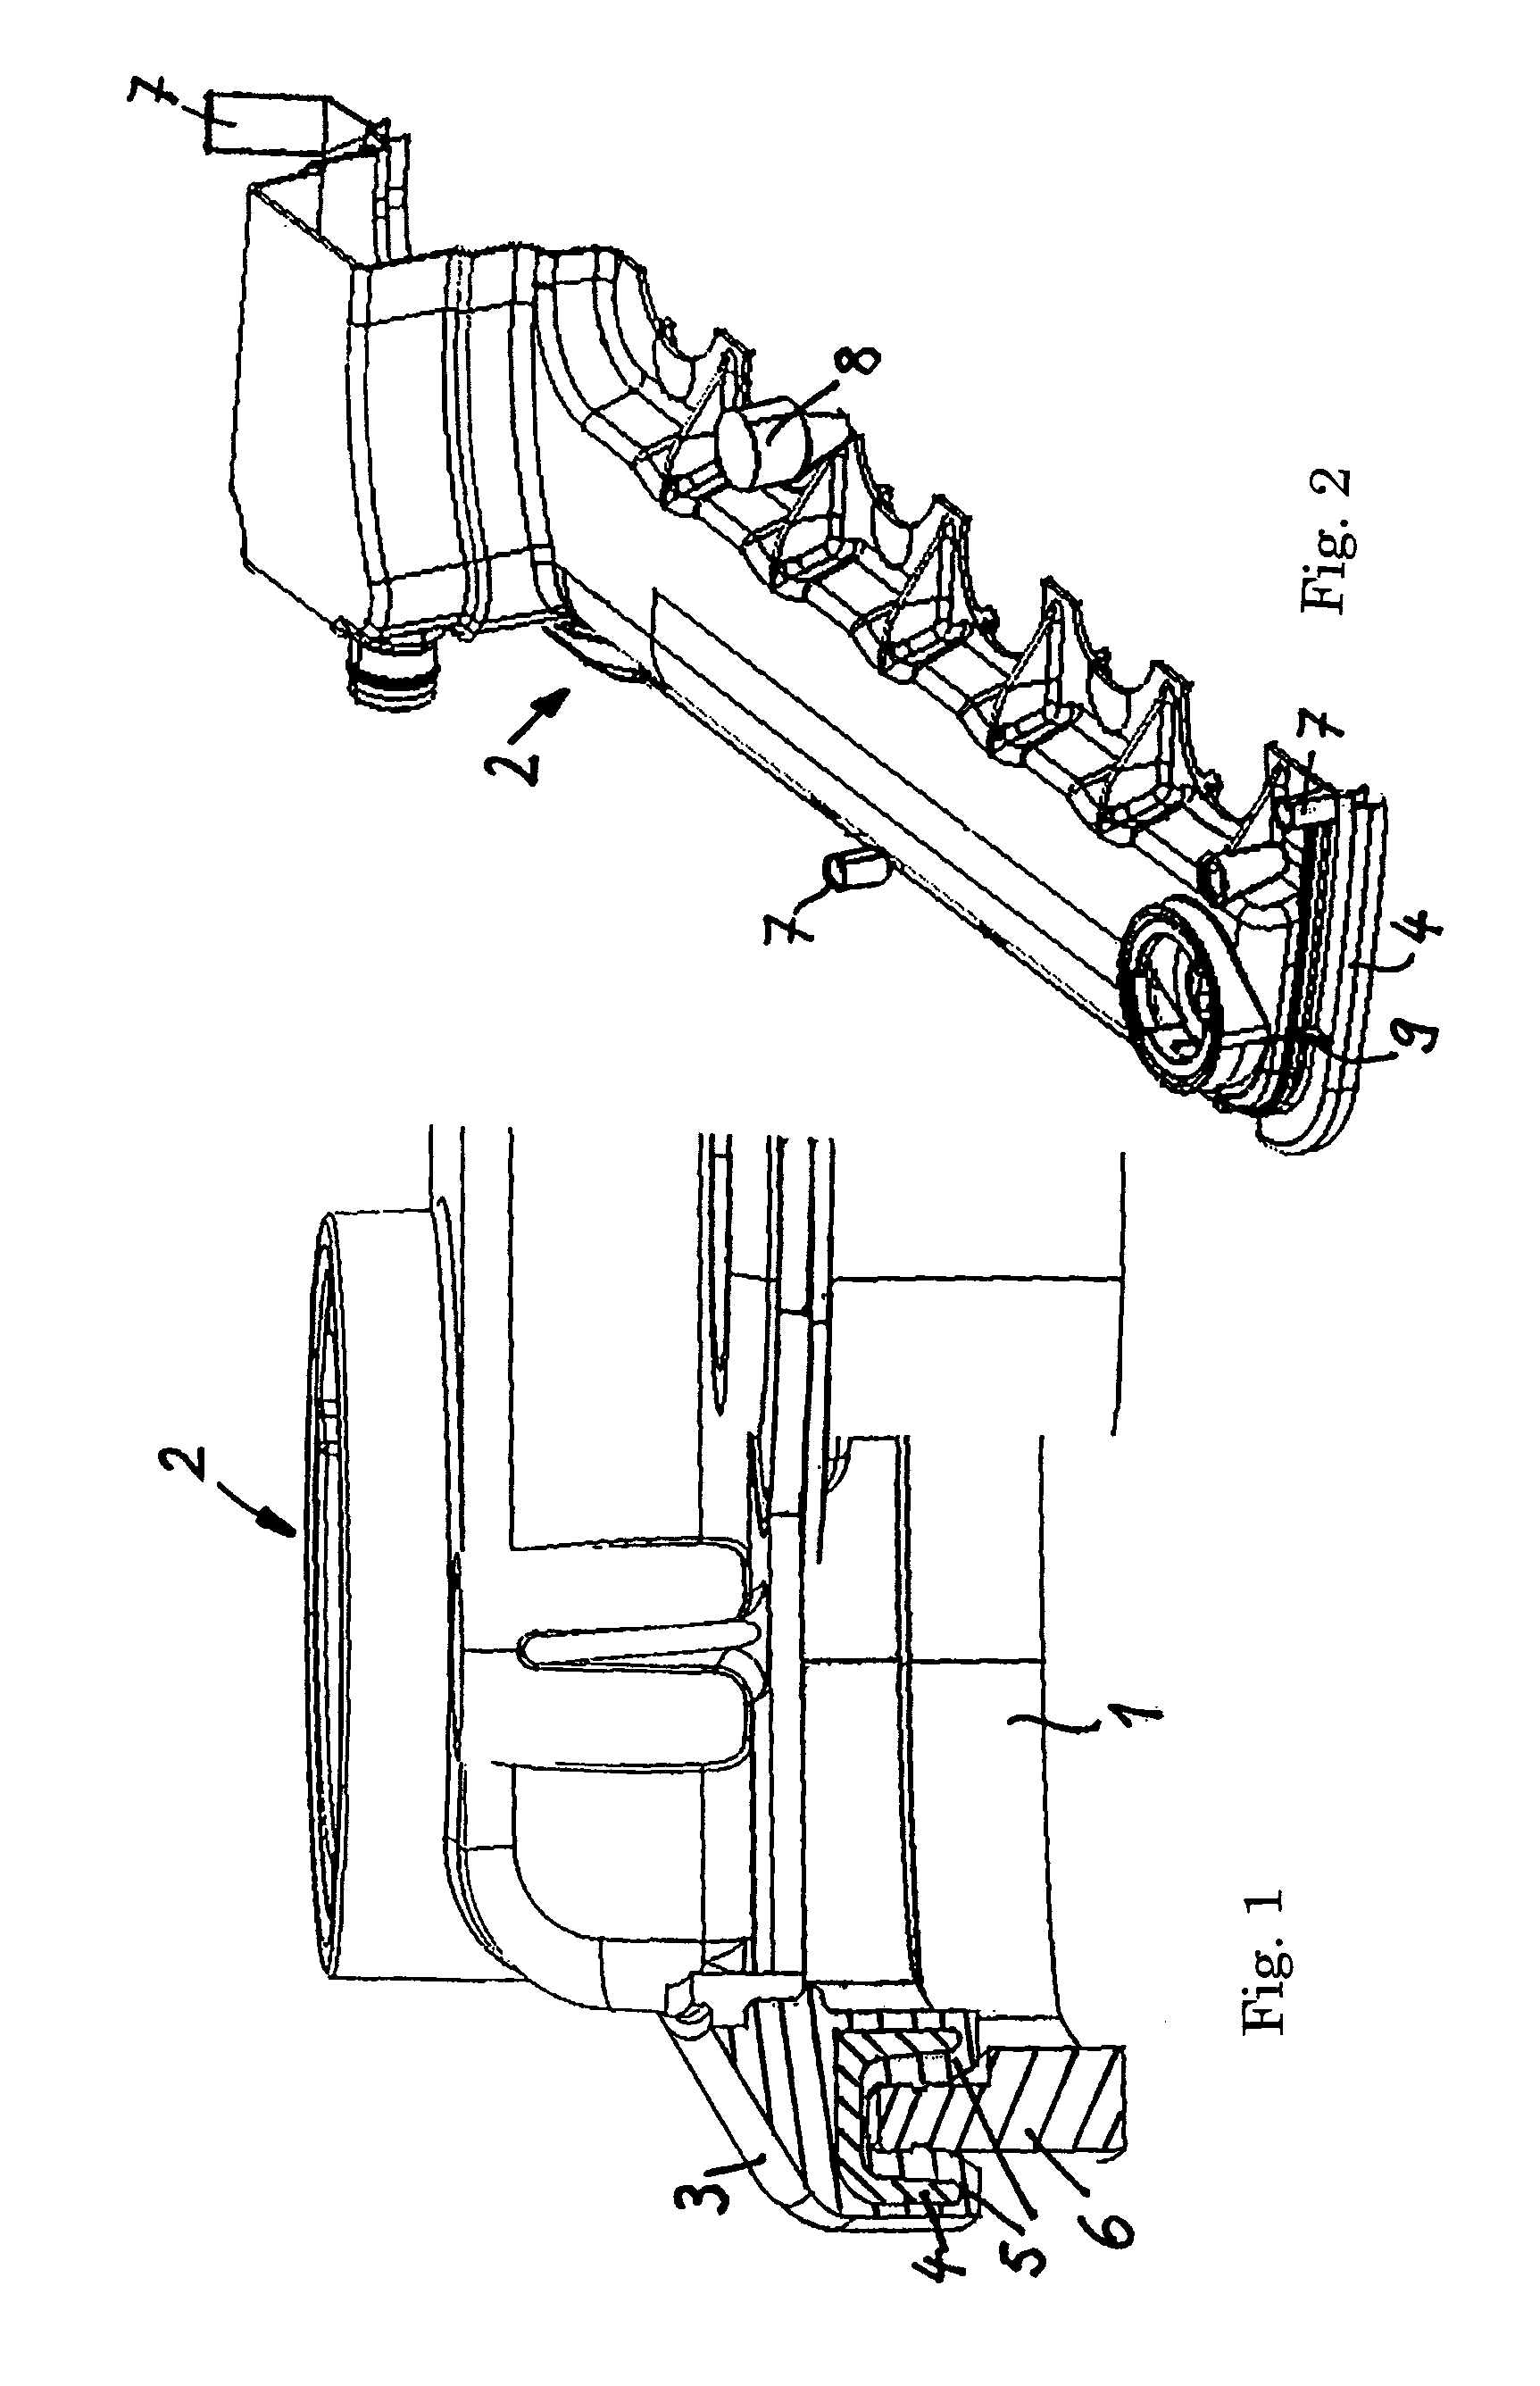 Cylinder head cover assembly for the cylinder head of an internal combustion engine and process for producing a cylinder head cover assembly